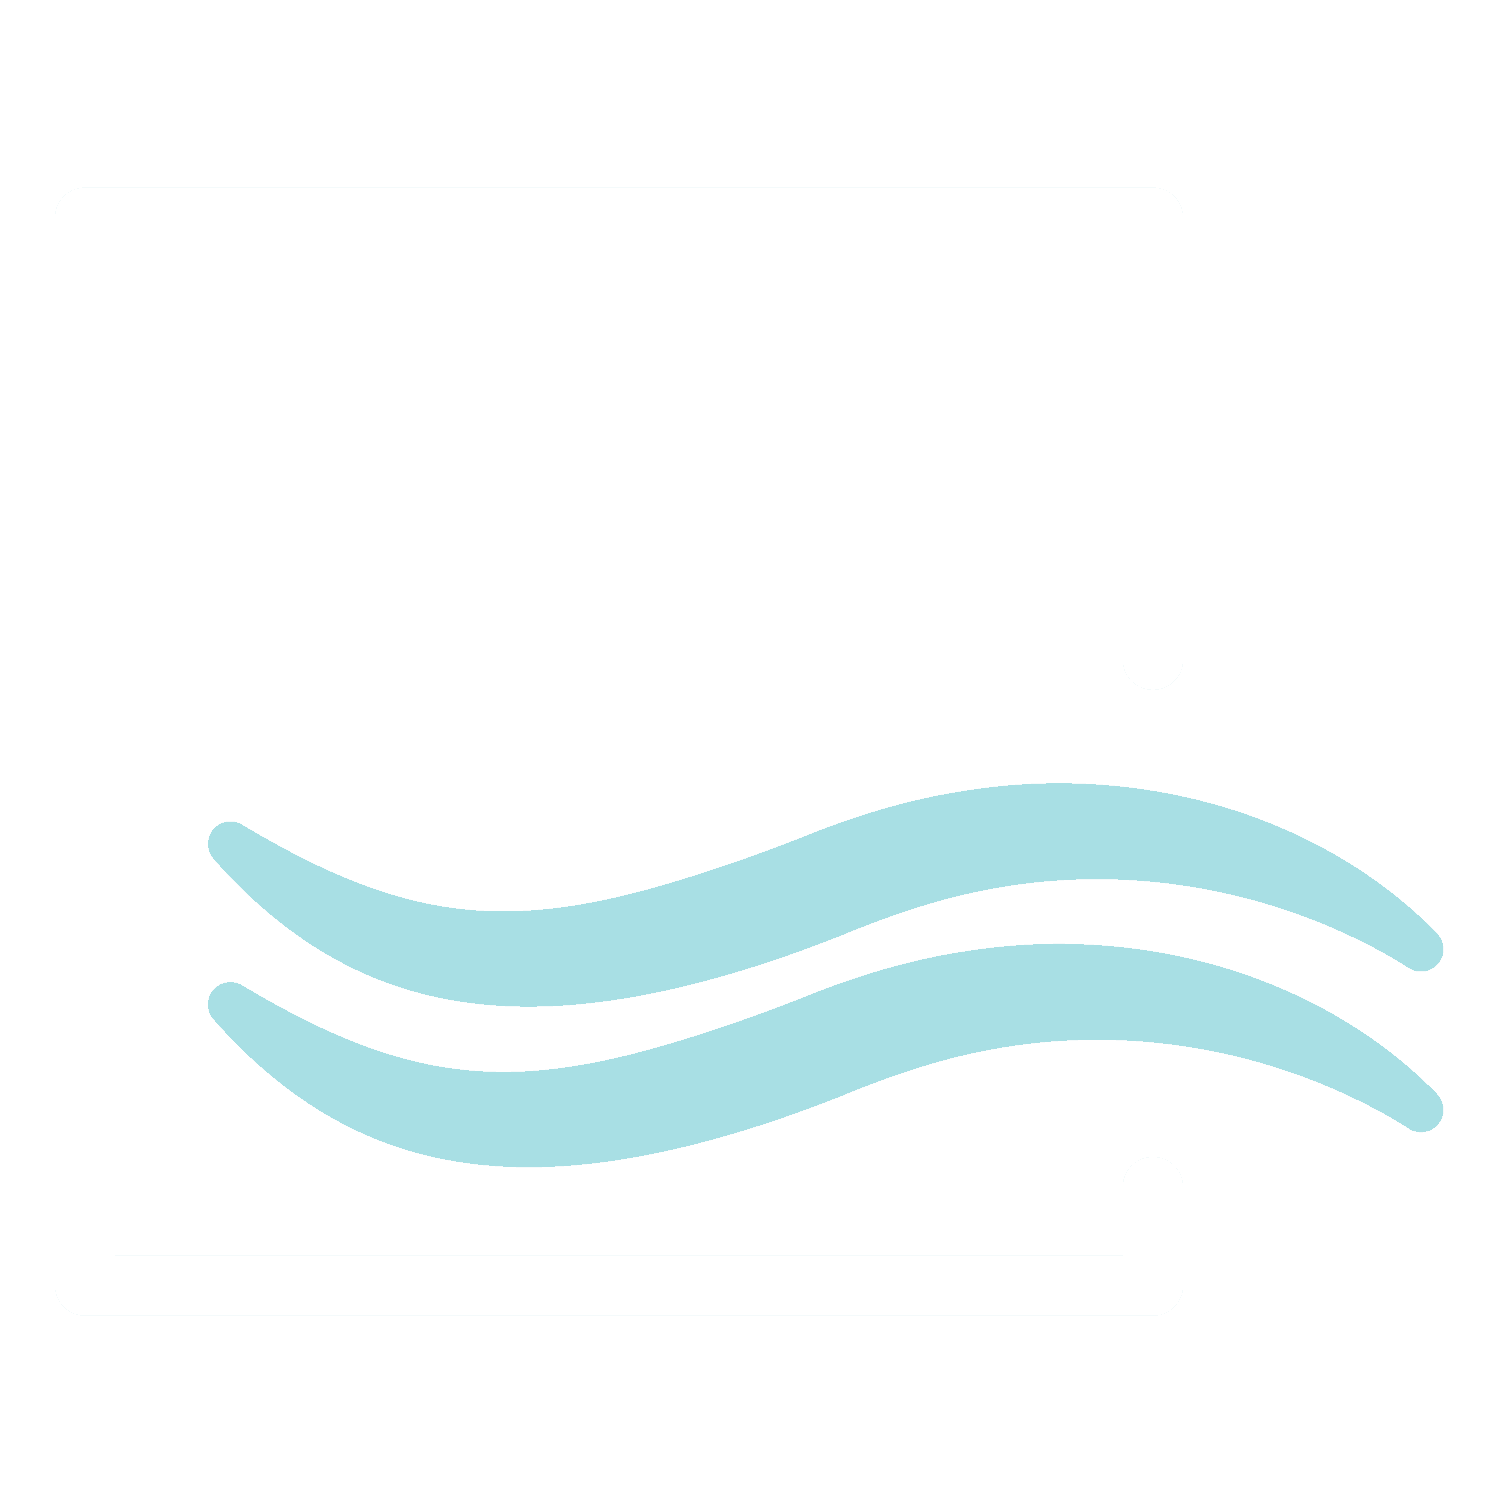 Project 412 waves logo